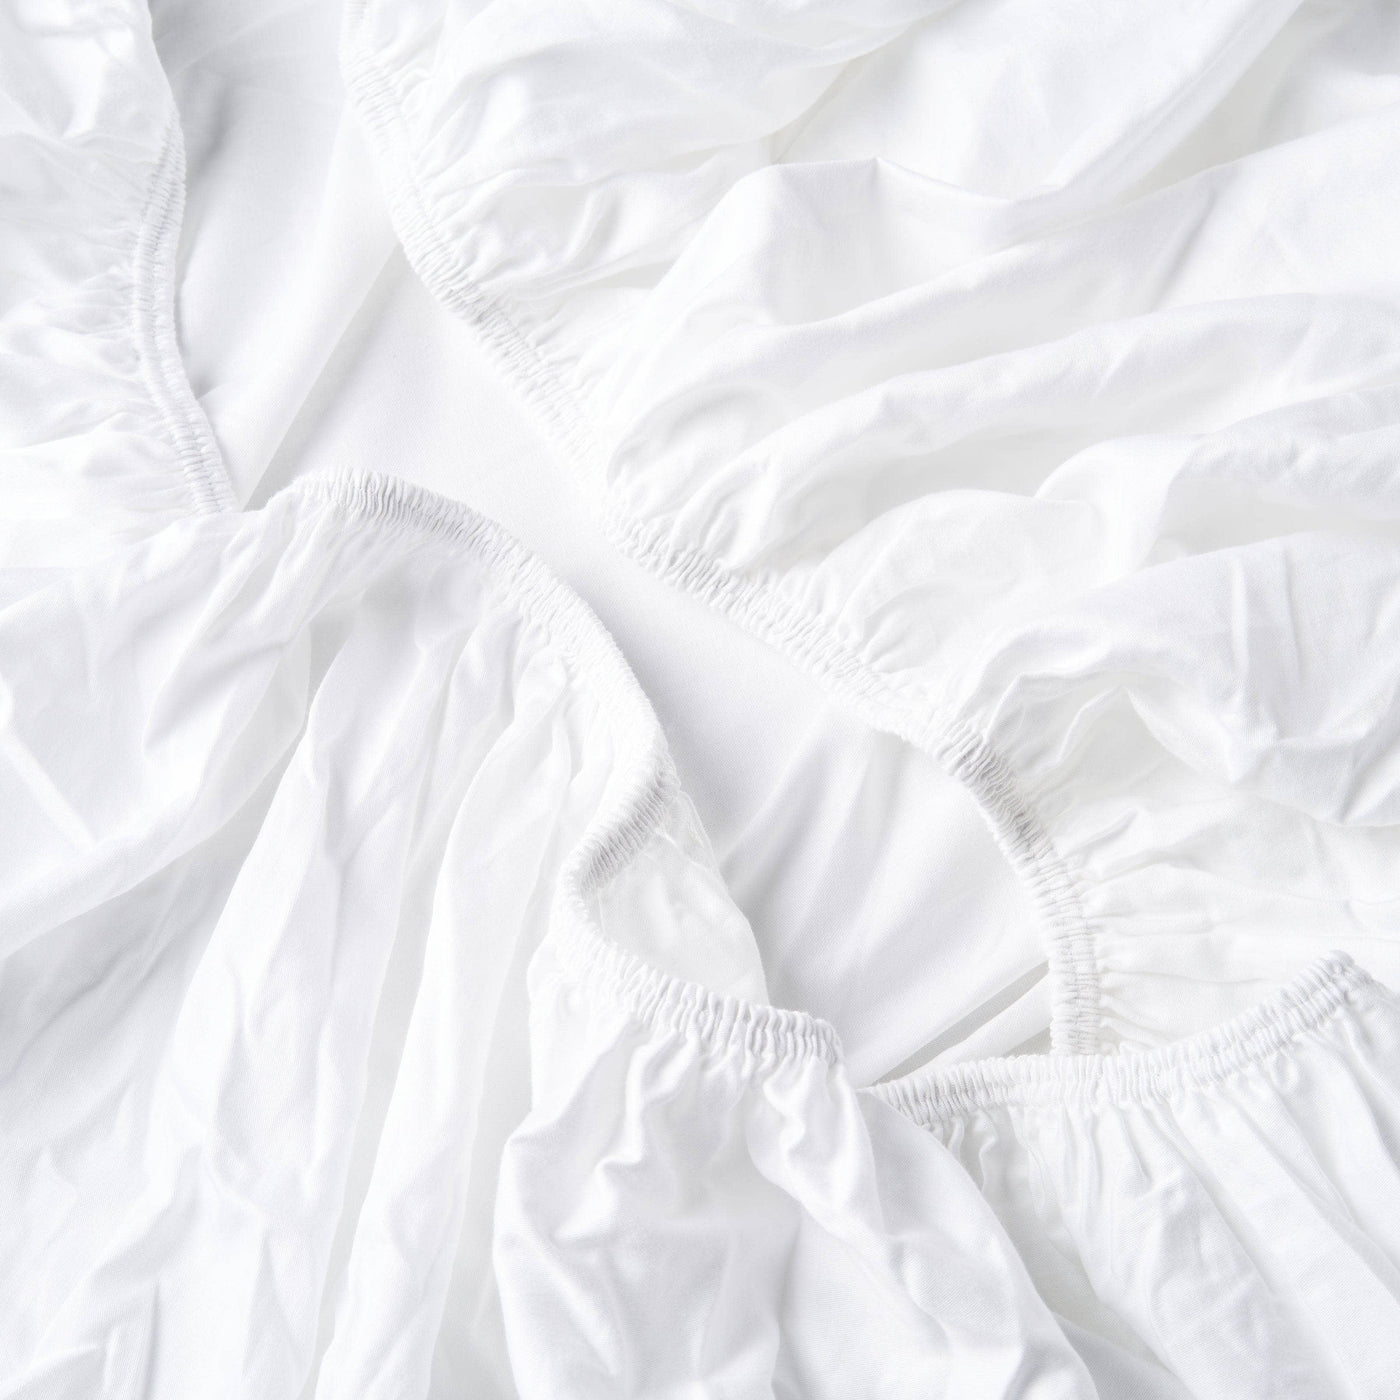 Darcy 100% Turkish Cotton 210 TC Fitted Sheet, White, King Size Bed Sheets sazy.com